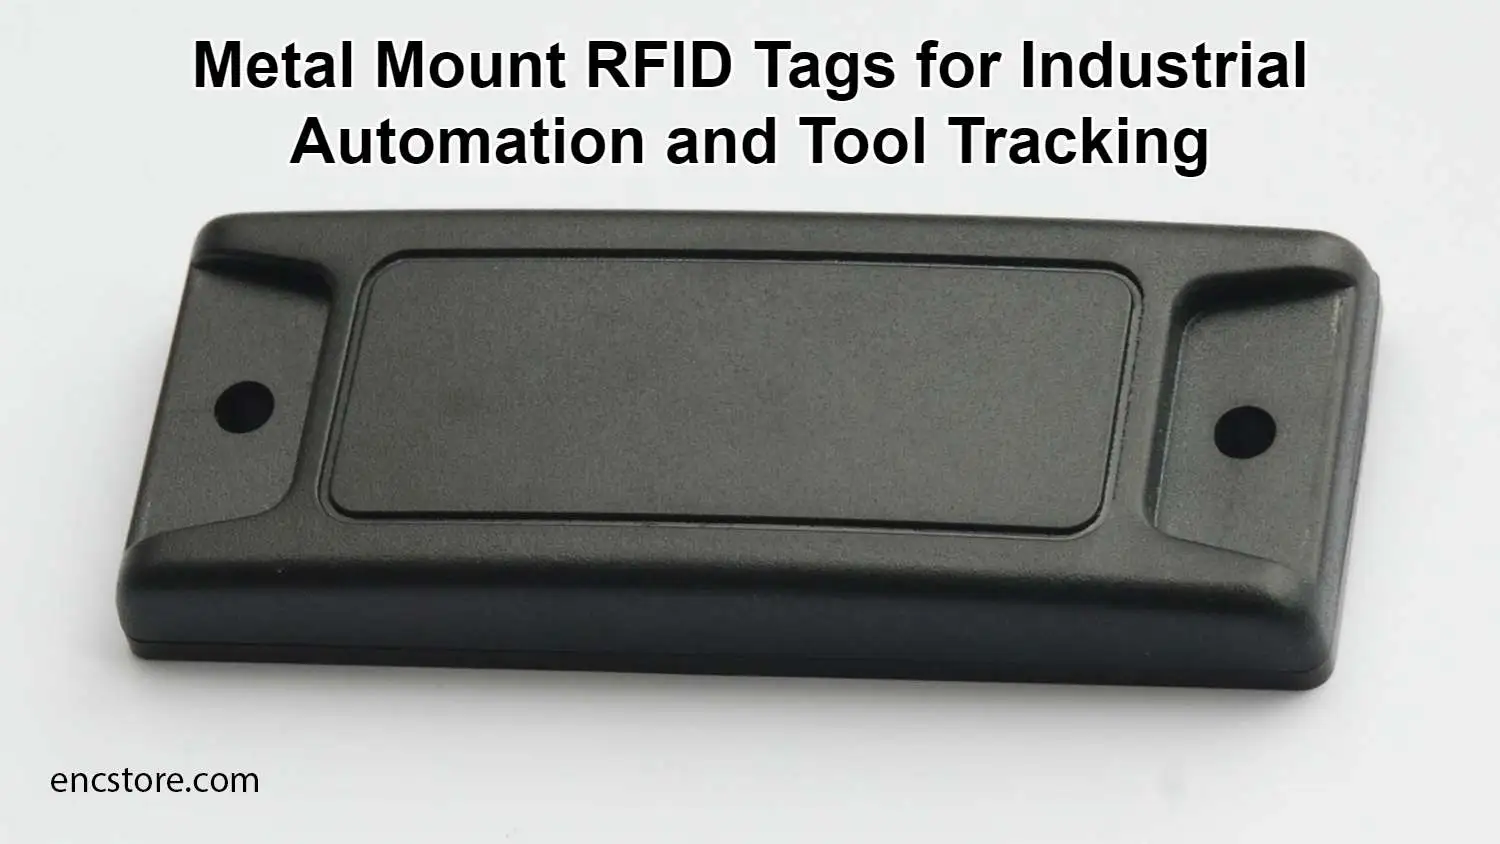 Metal Mount RFID Tags for Industrial Automation and Tool Tracking